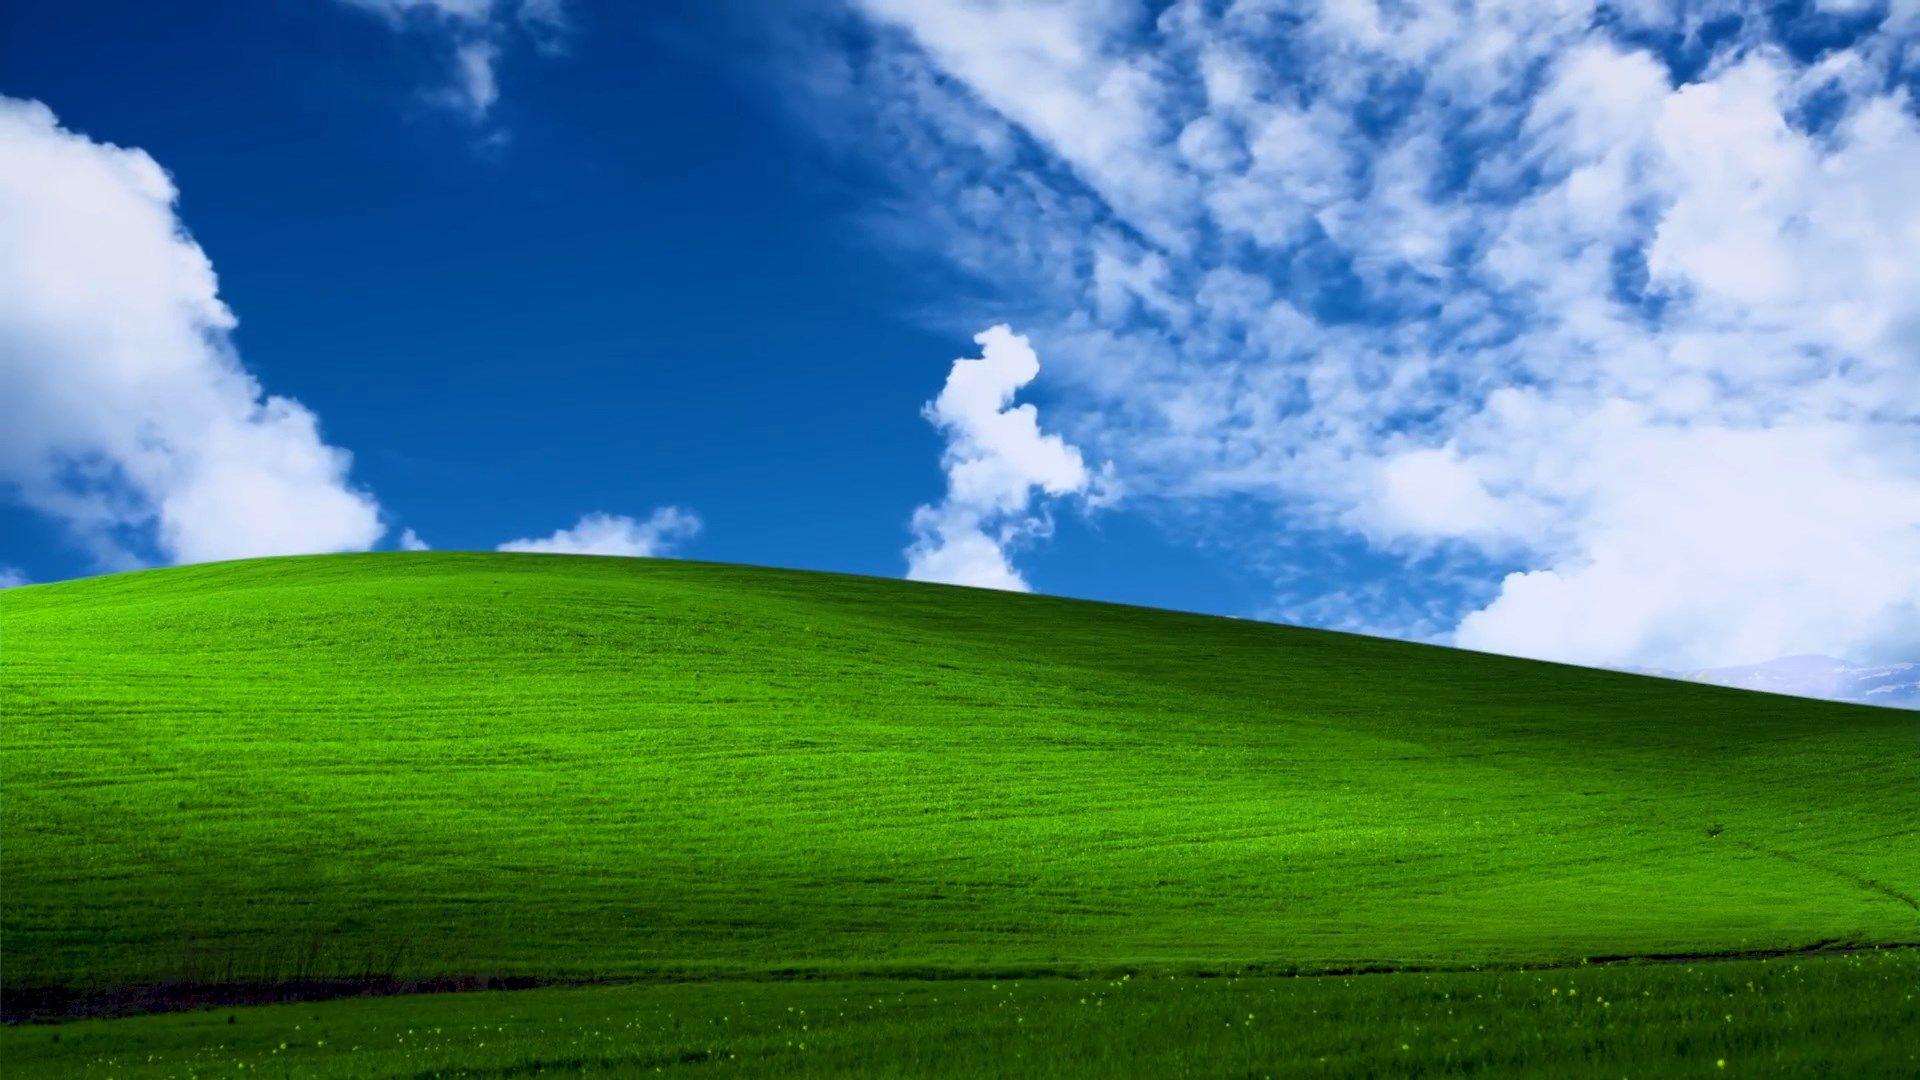 Windows XP Bliss Wallpapers - Top Free Windows XP Bliss Backgrounds ...